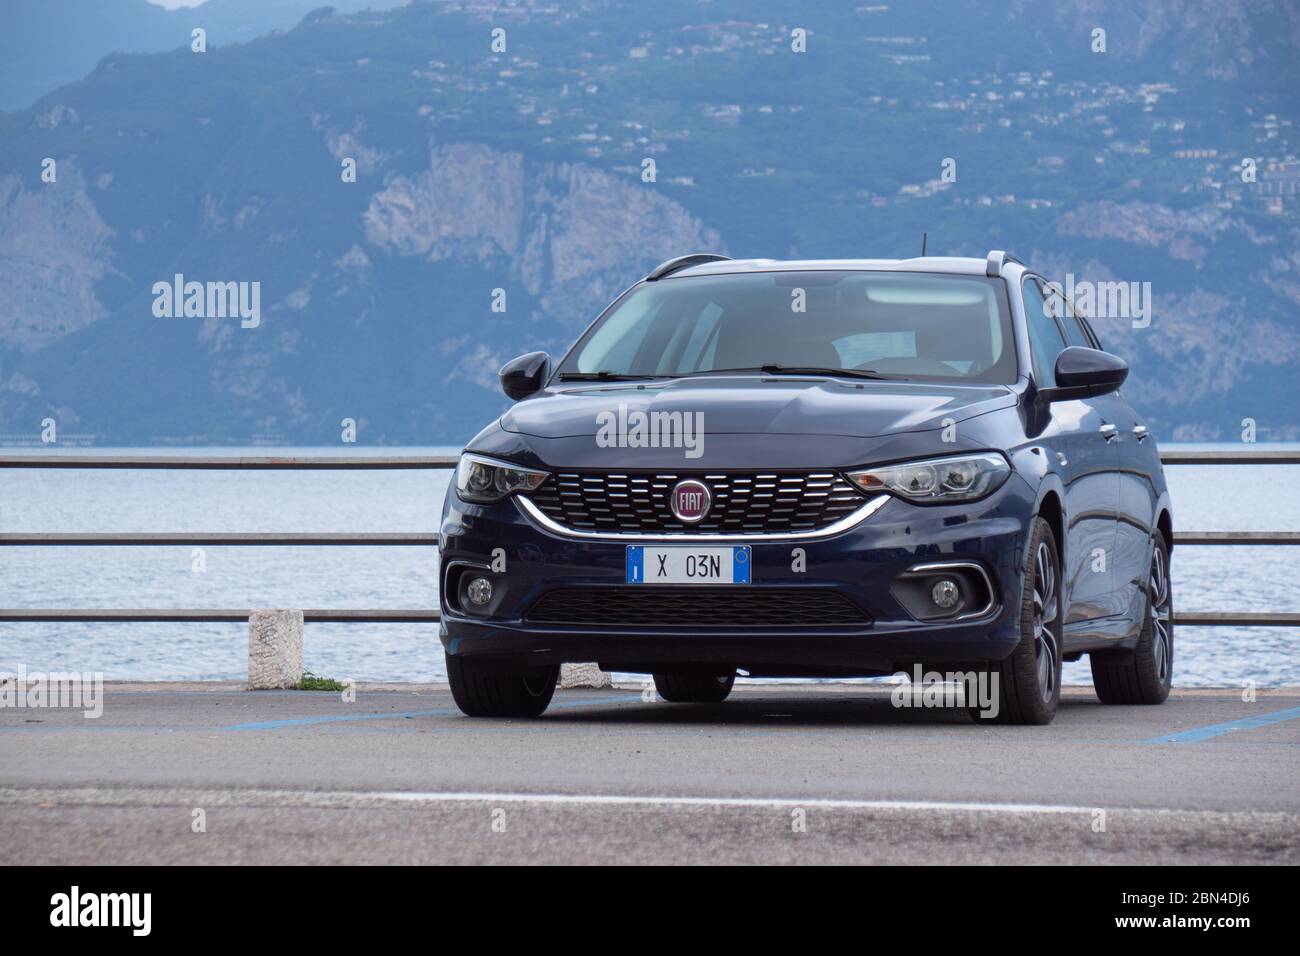 Lombardia, Italy - September 2019: Fiat Tipo passenger car. FIAT is a Italian car manufacturer with long traditions and history. Stock Photo